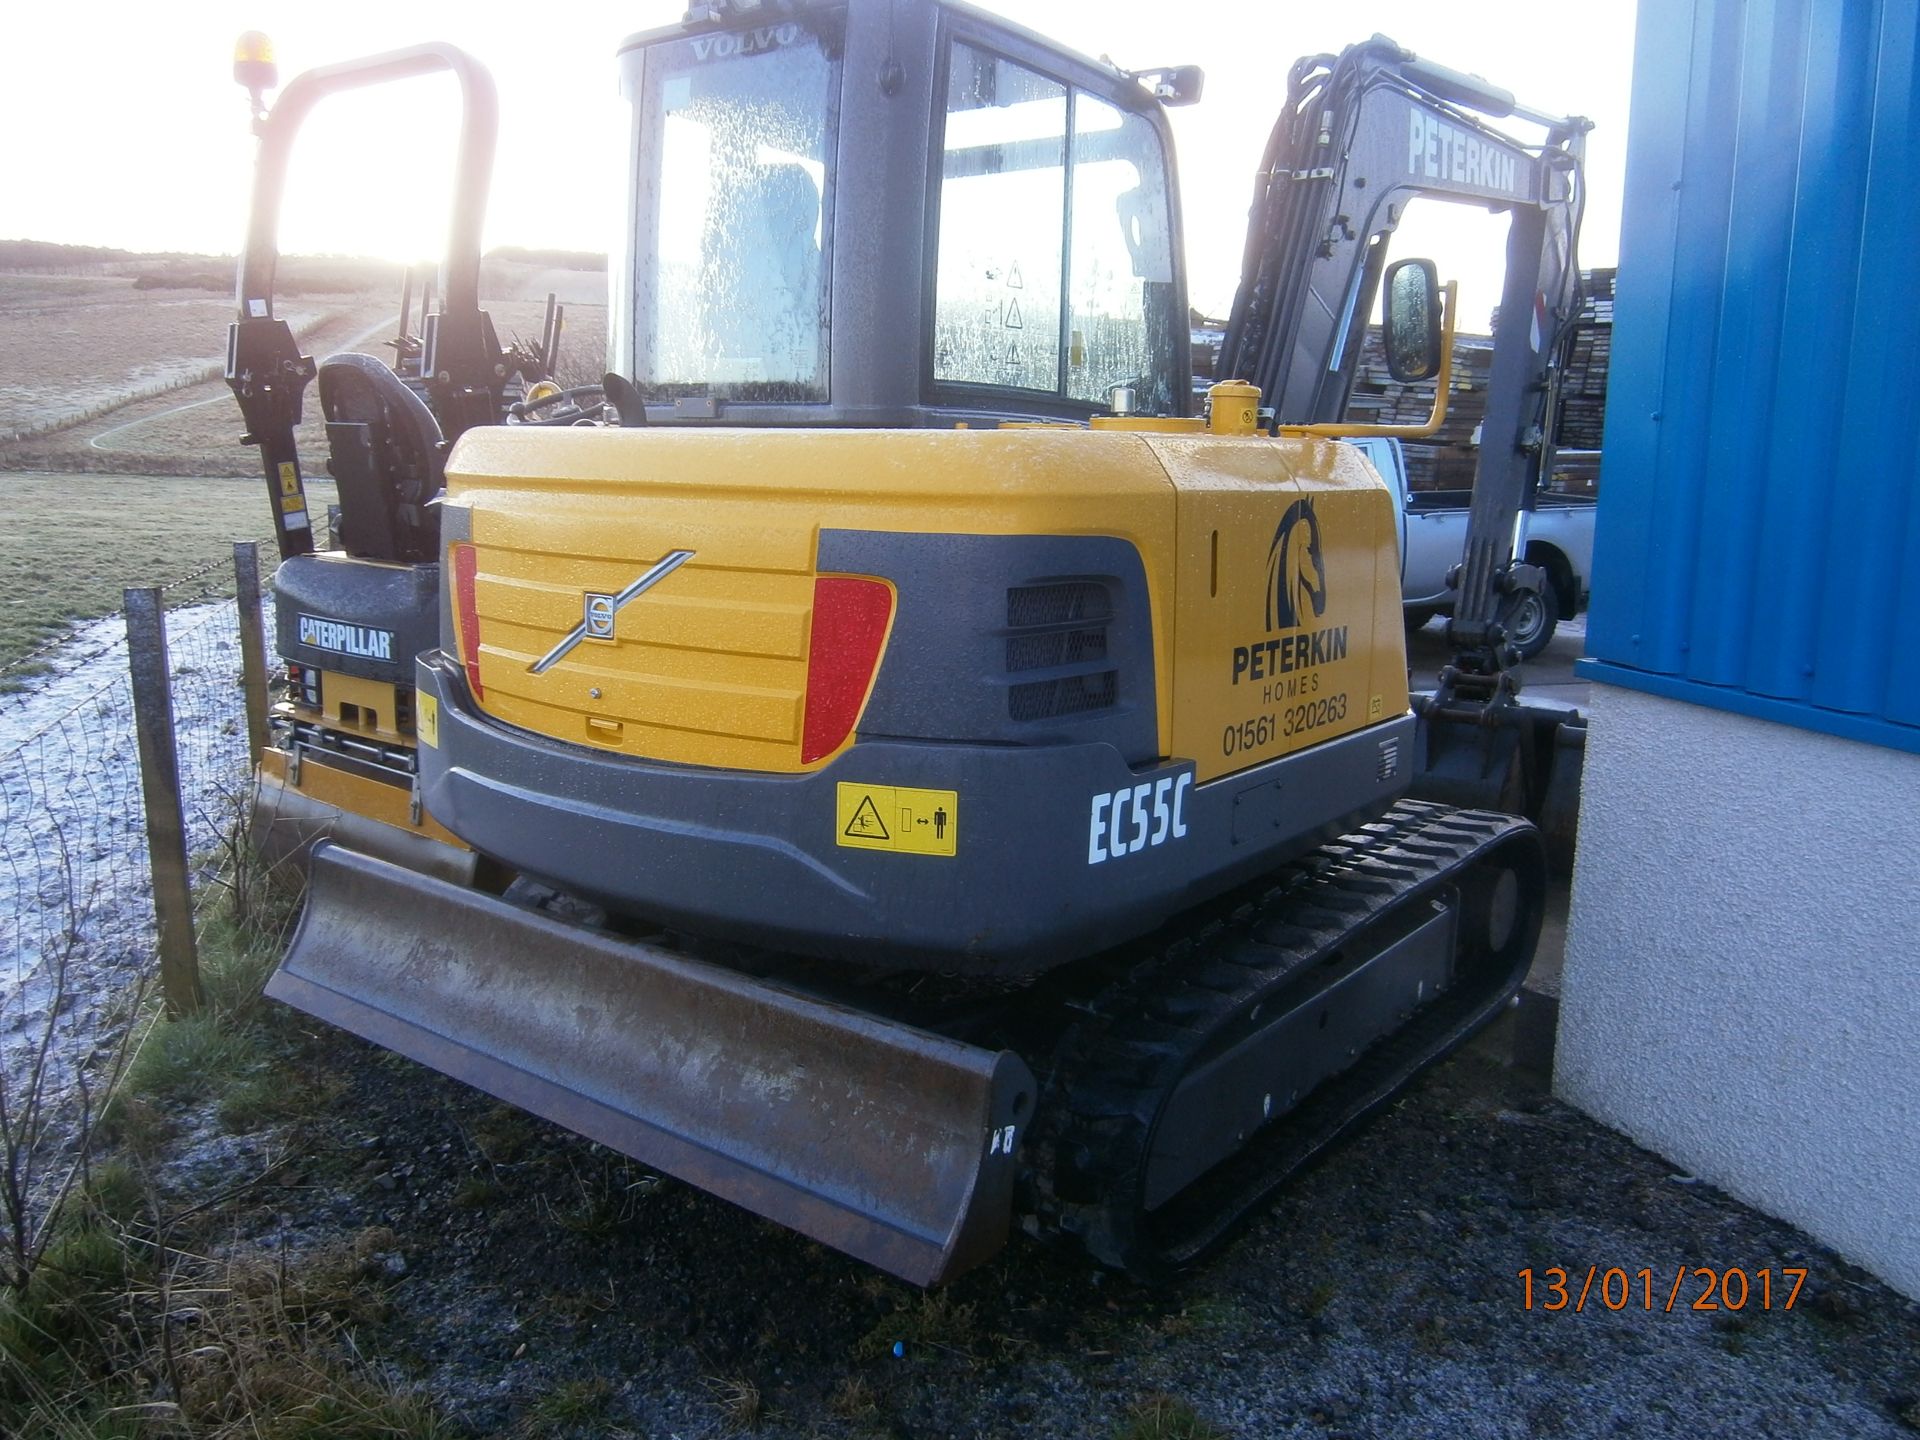 1 No. Volvo Combo EC55C 6 Tonne Excavator - Year 2016 - Serial No. VCEEC55CH00113437 - - Image 2 of 4